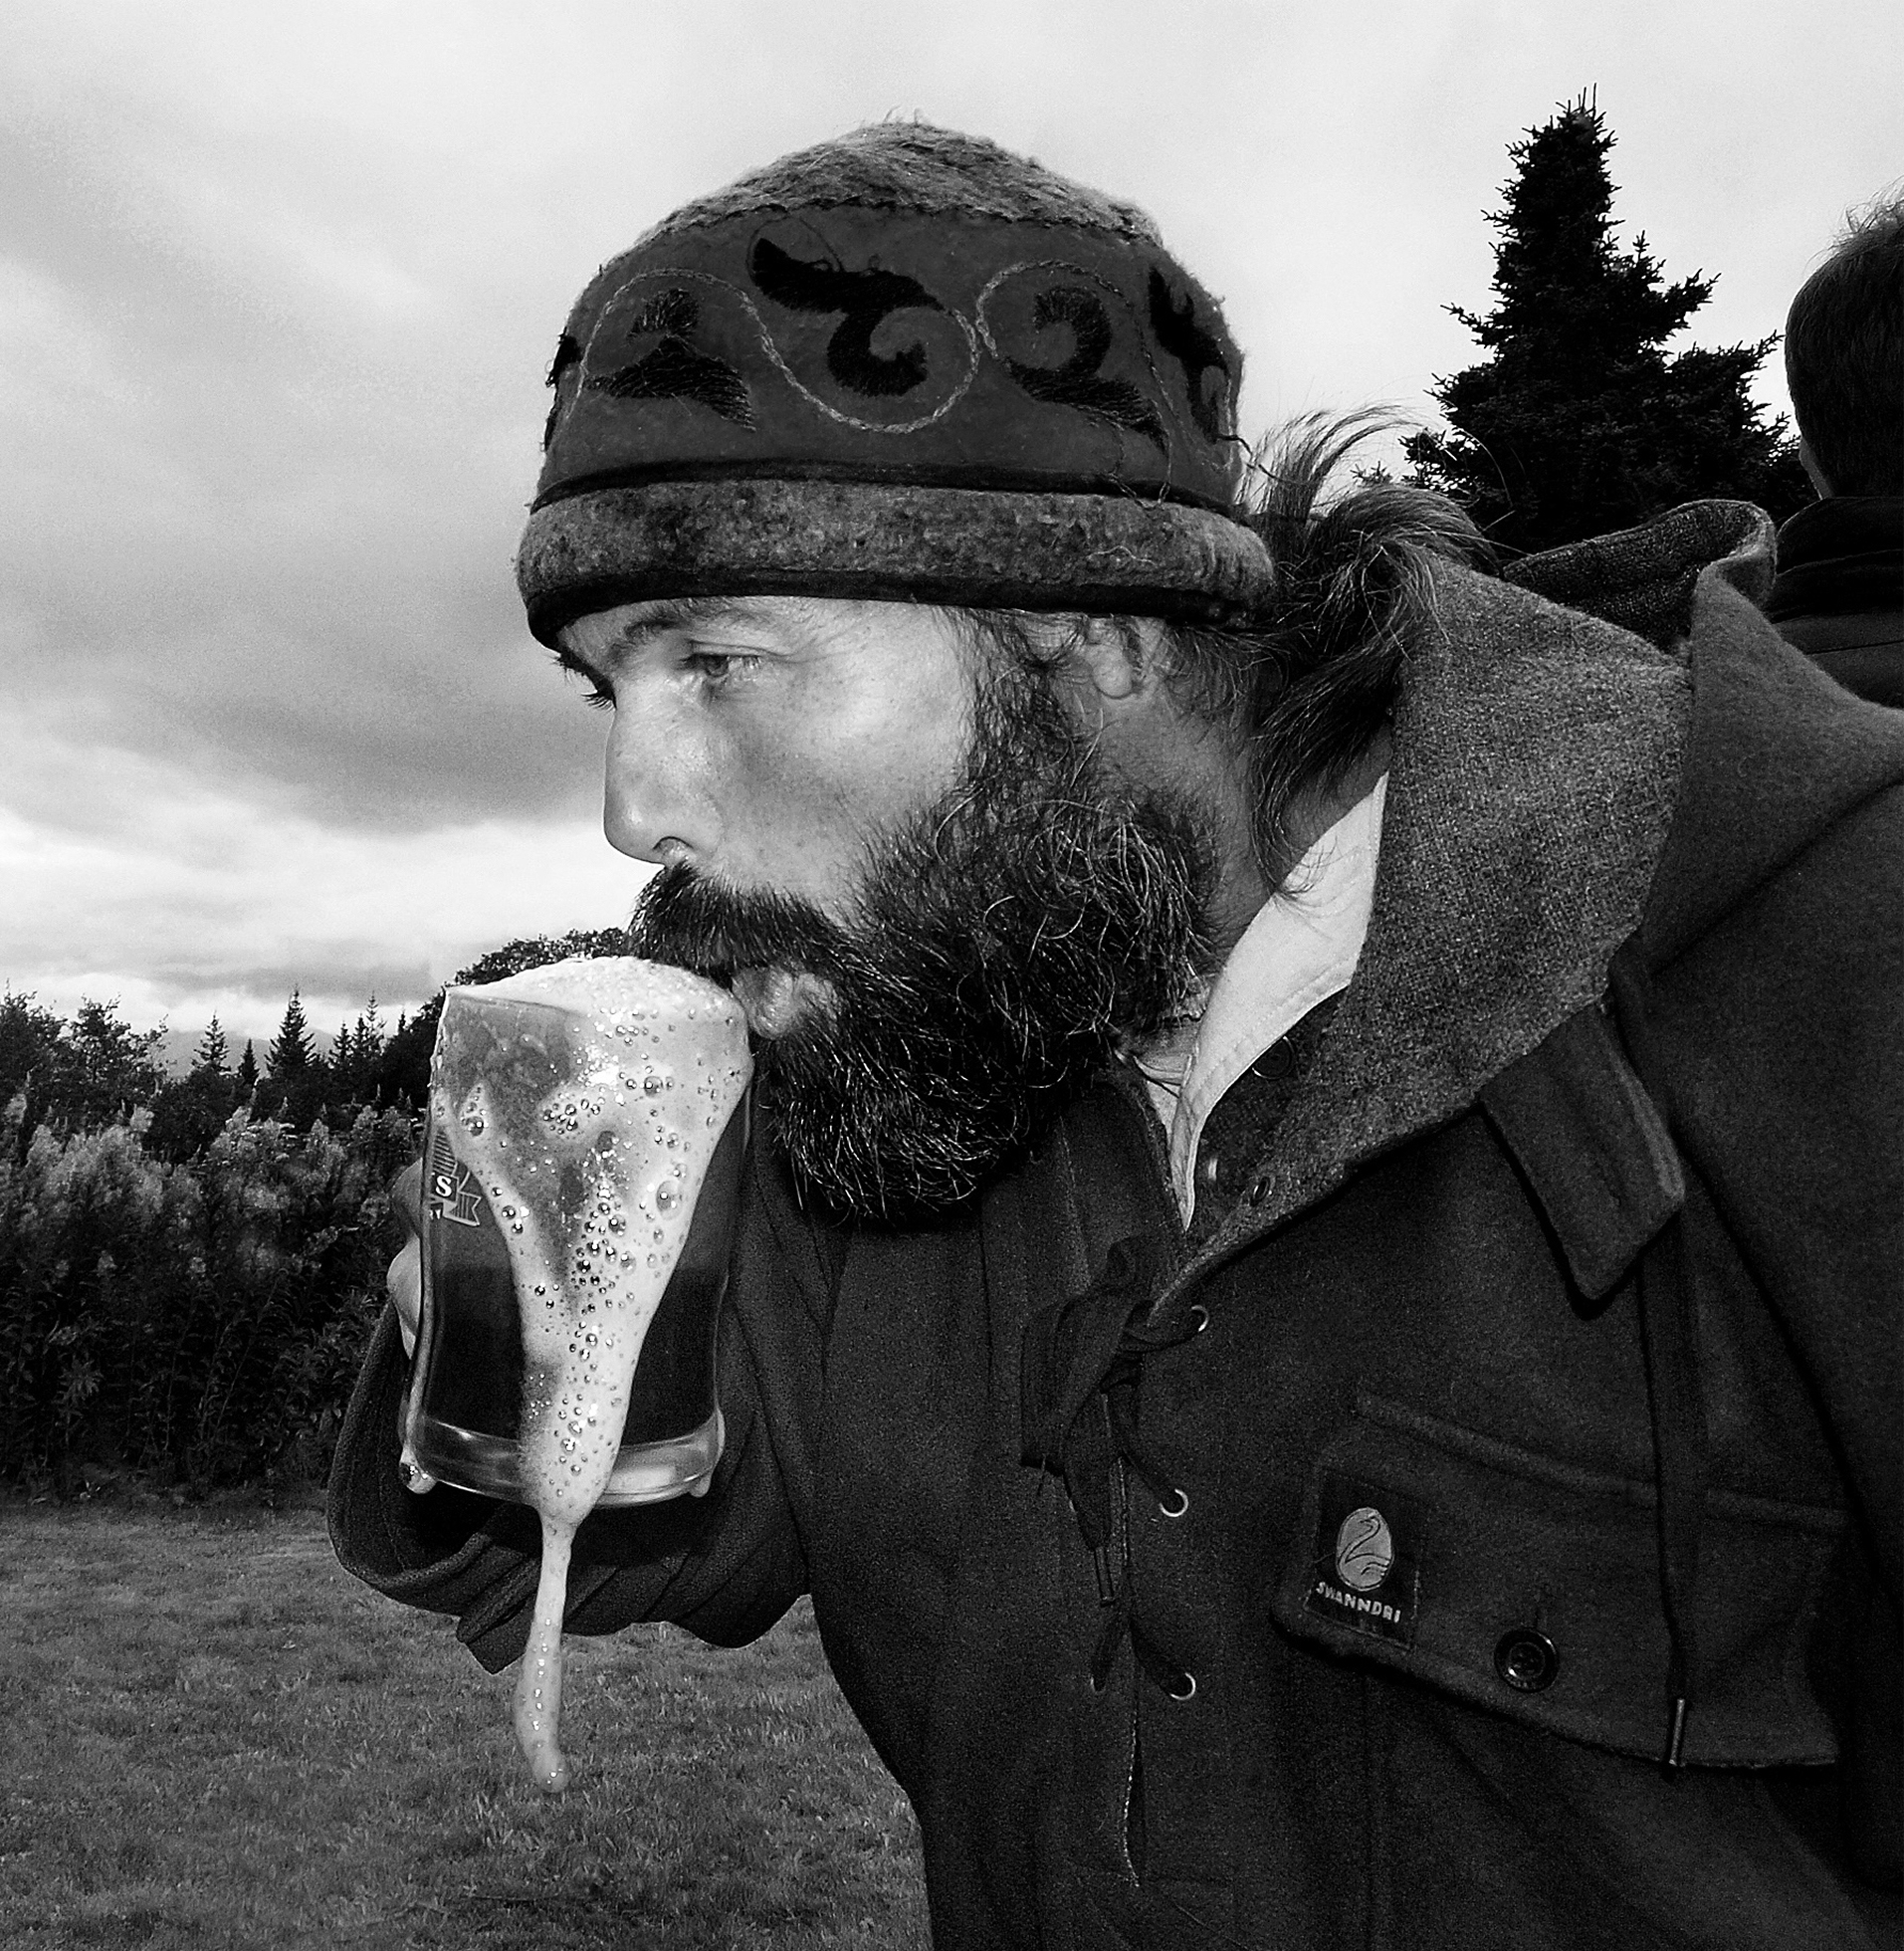 A man with a full beard and mustache wearing a hat and coat stands in a field on a cloudy day and drinks from a glass overflowing with beer.